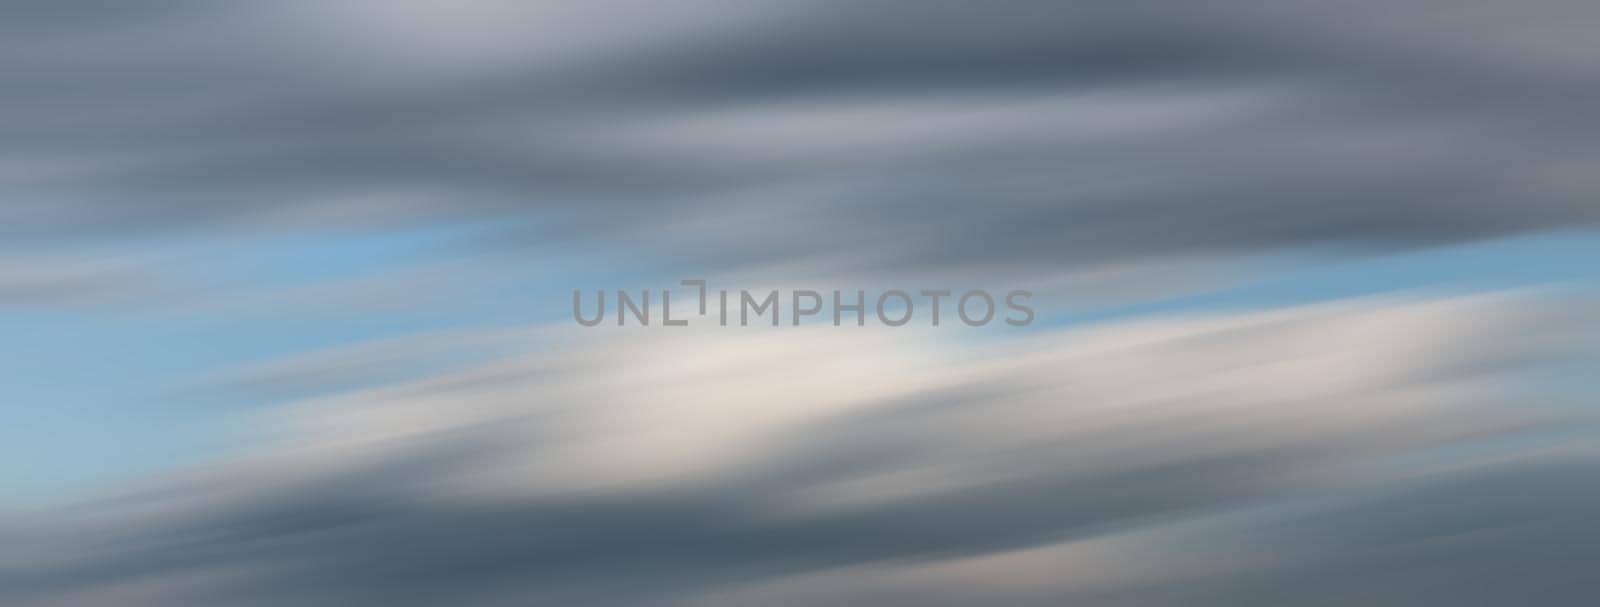 Defocused natural sky background with motion blur